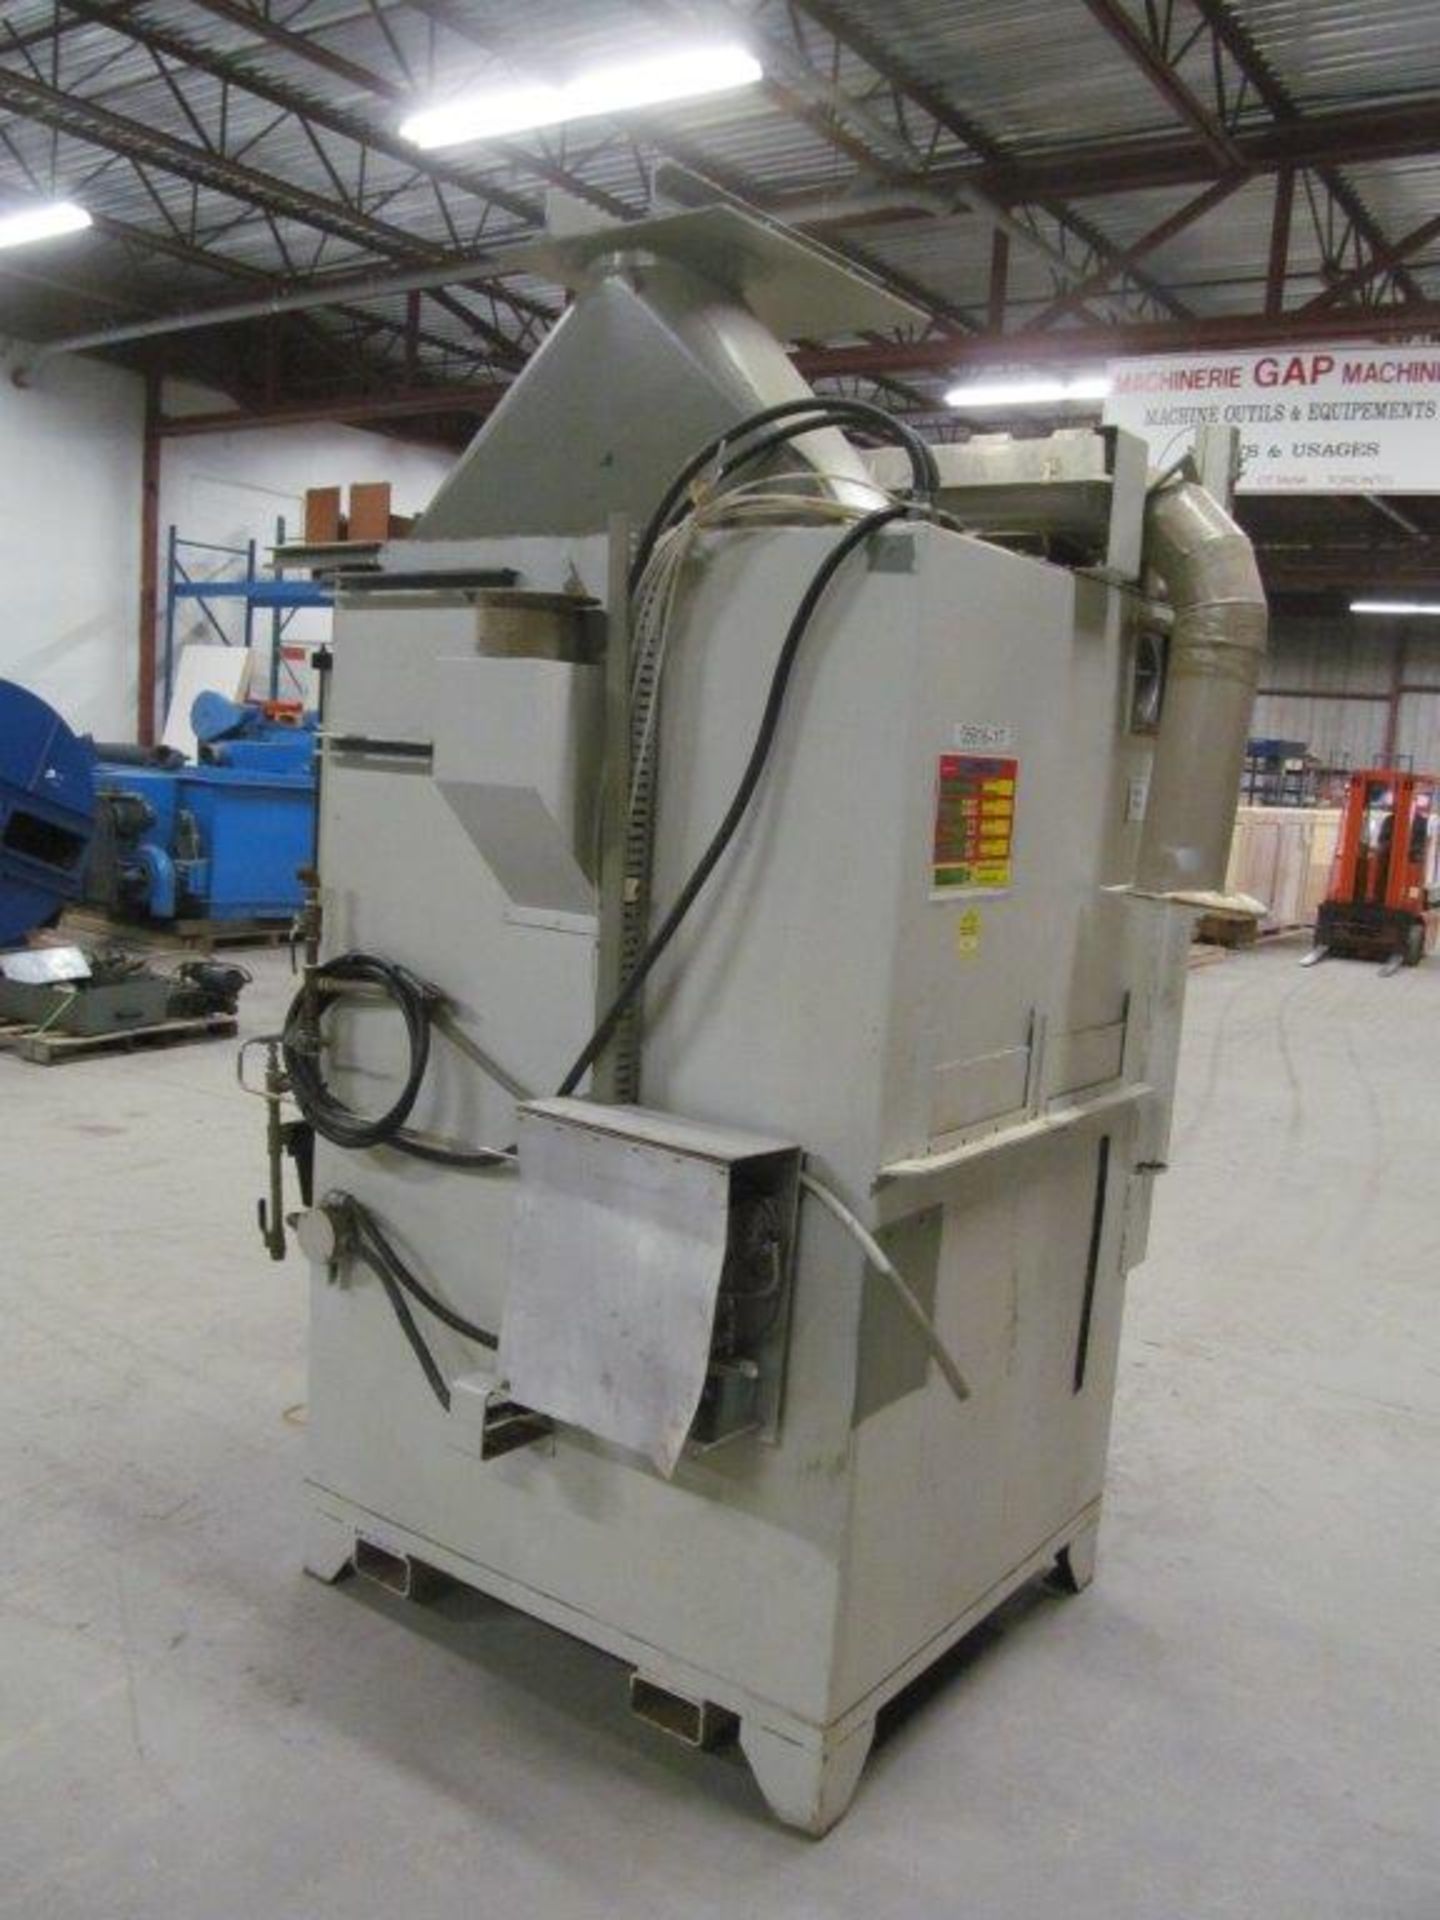 CLEANING SPRAY BOOTH MODEL MC98-062, ELECTRICS: 575V / 3PH / 60C, CONDITION UNKNOWN - Image 7 of 11